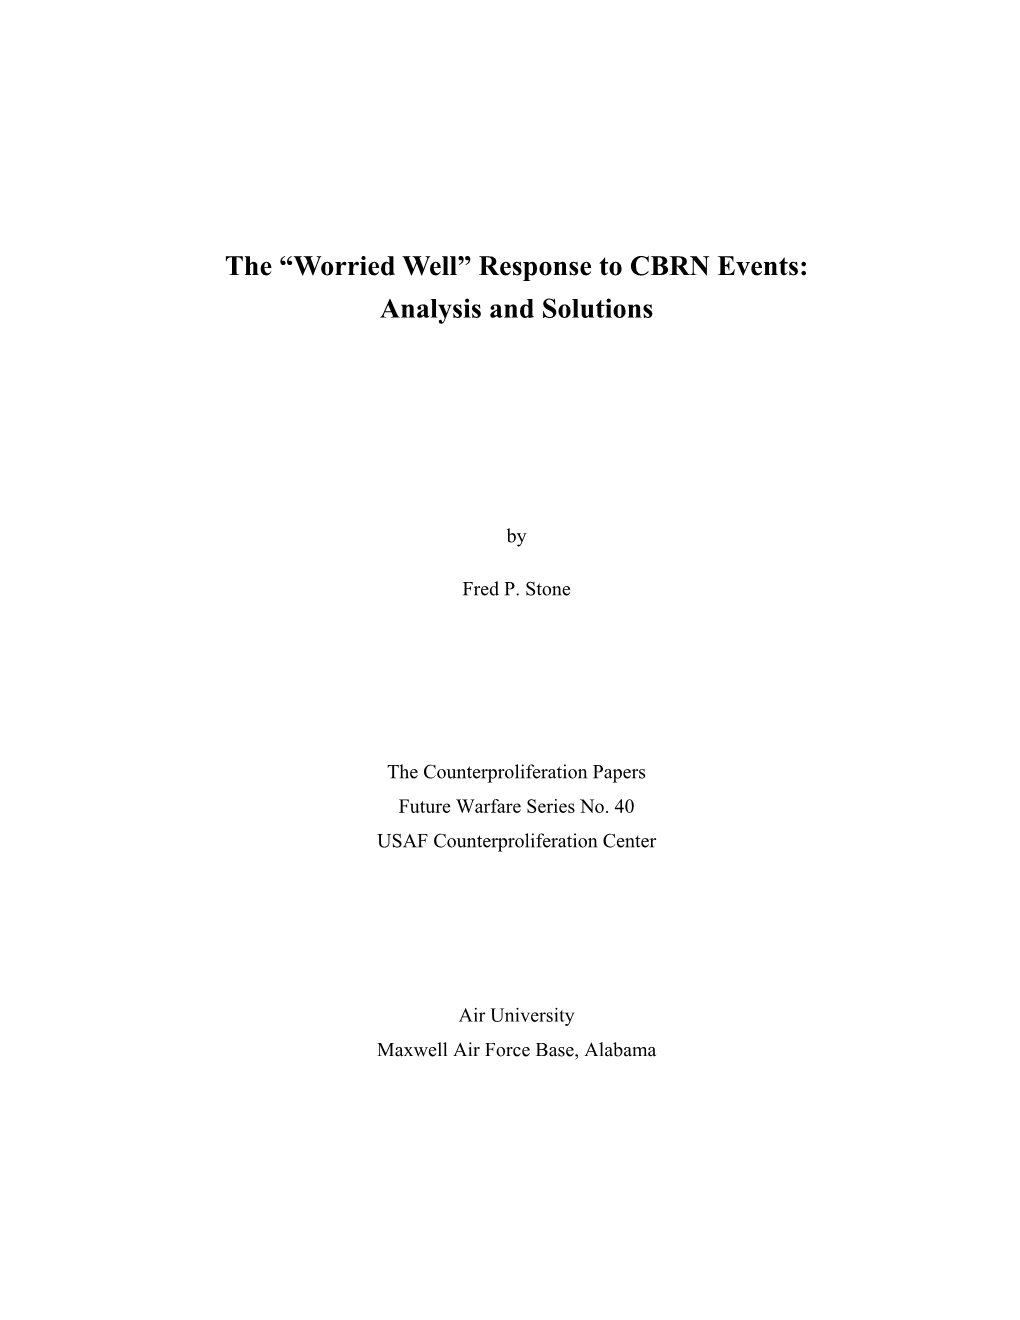 The “Worried Well” Response to CBRN Events: Analysis and Solutions